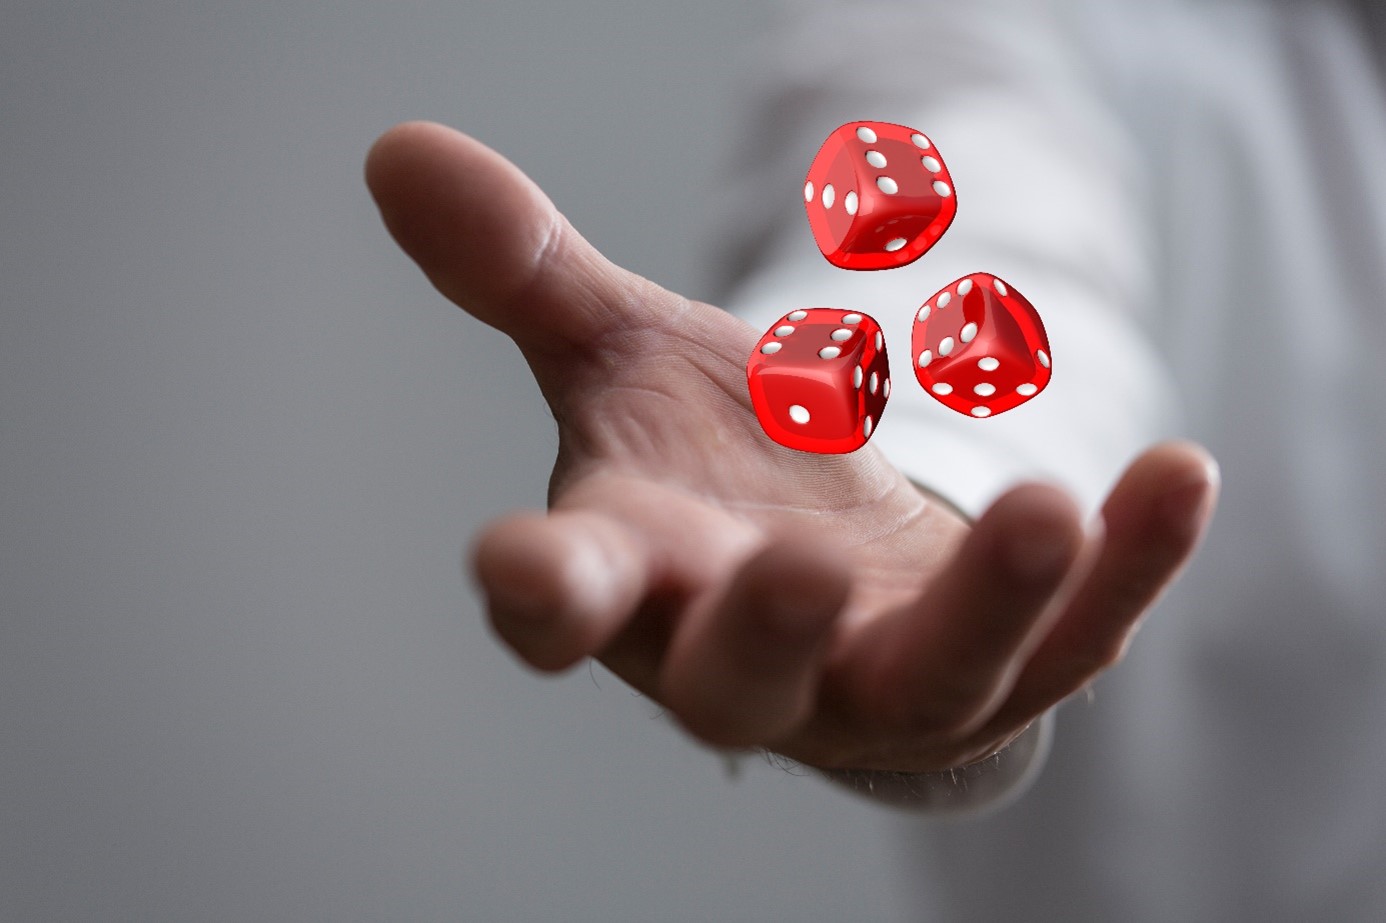 Casting Dice from a Hand